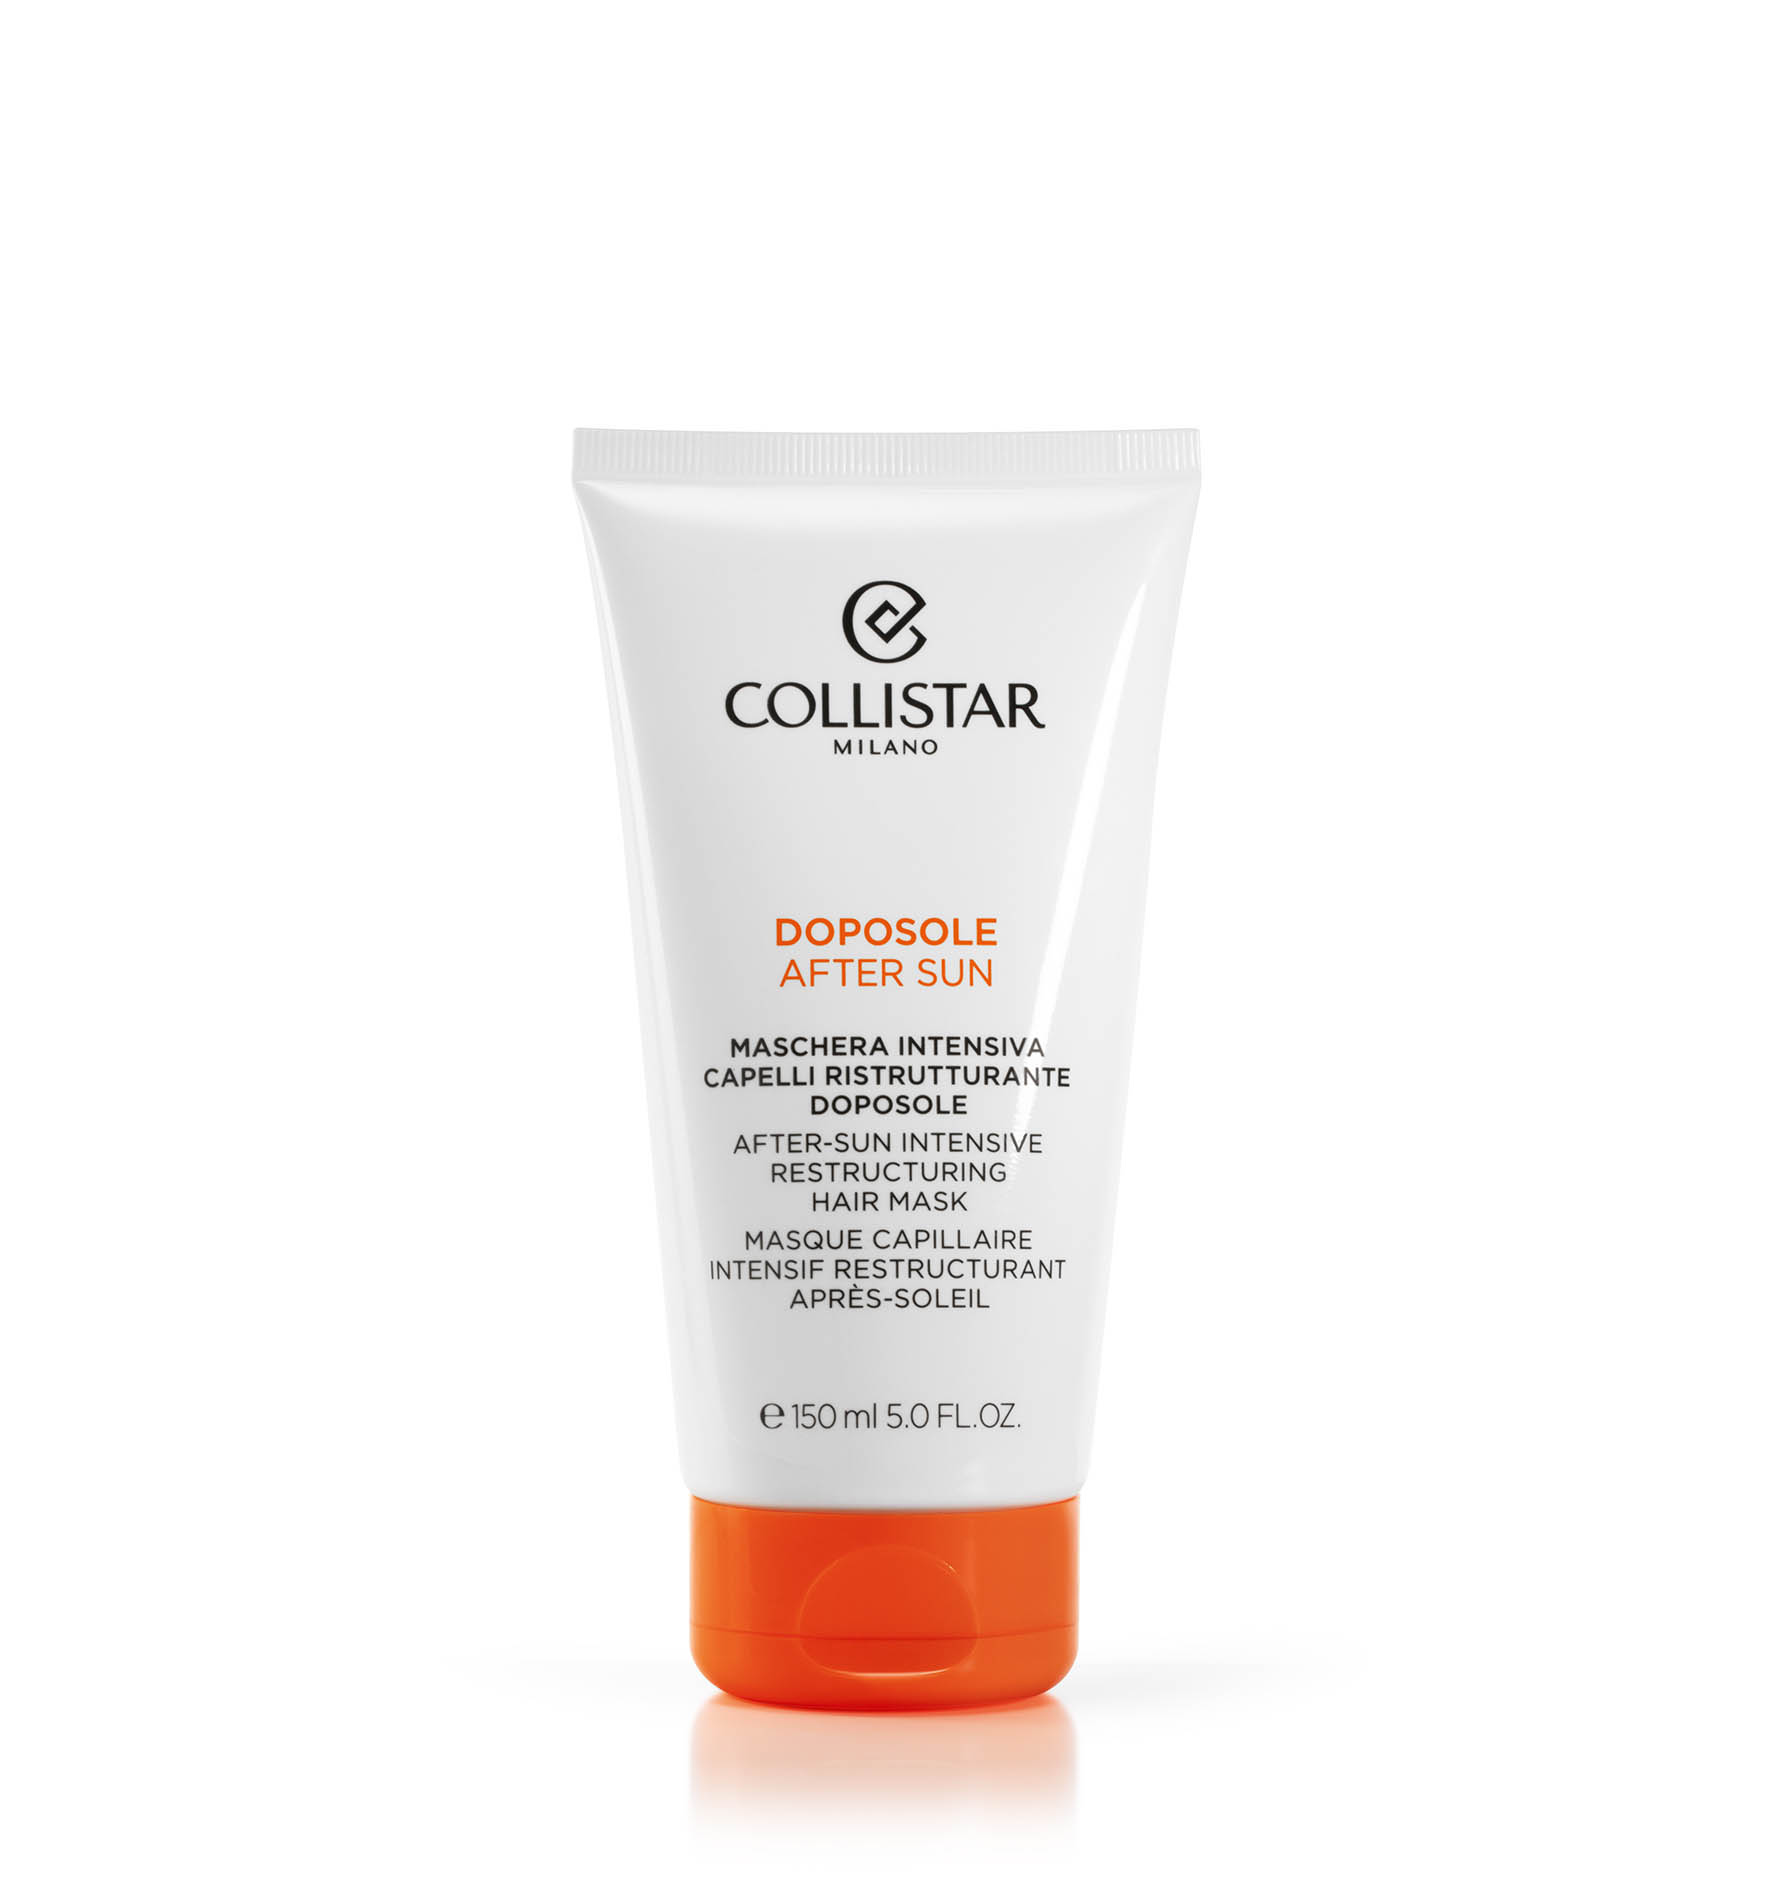 AFTER-SUN INTENSIVE RESTRUCTURING HAIR MASK - CATEGORY | Collistar - Shop Online Ufficiale